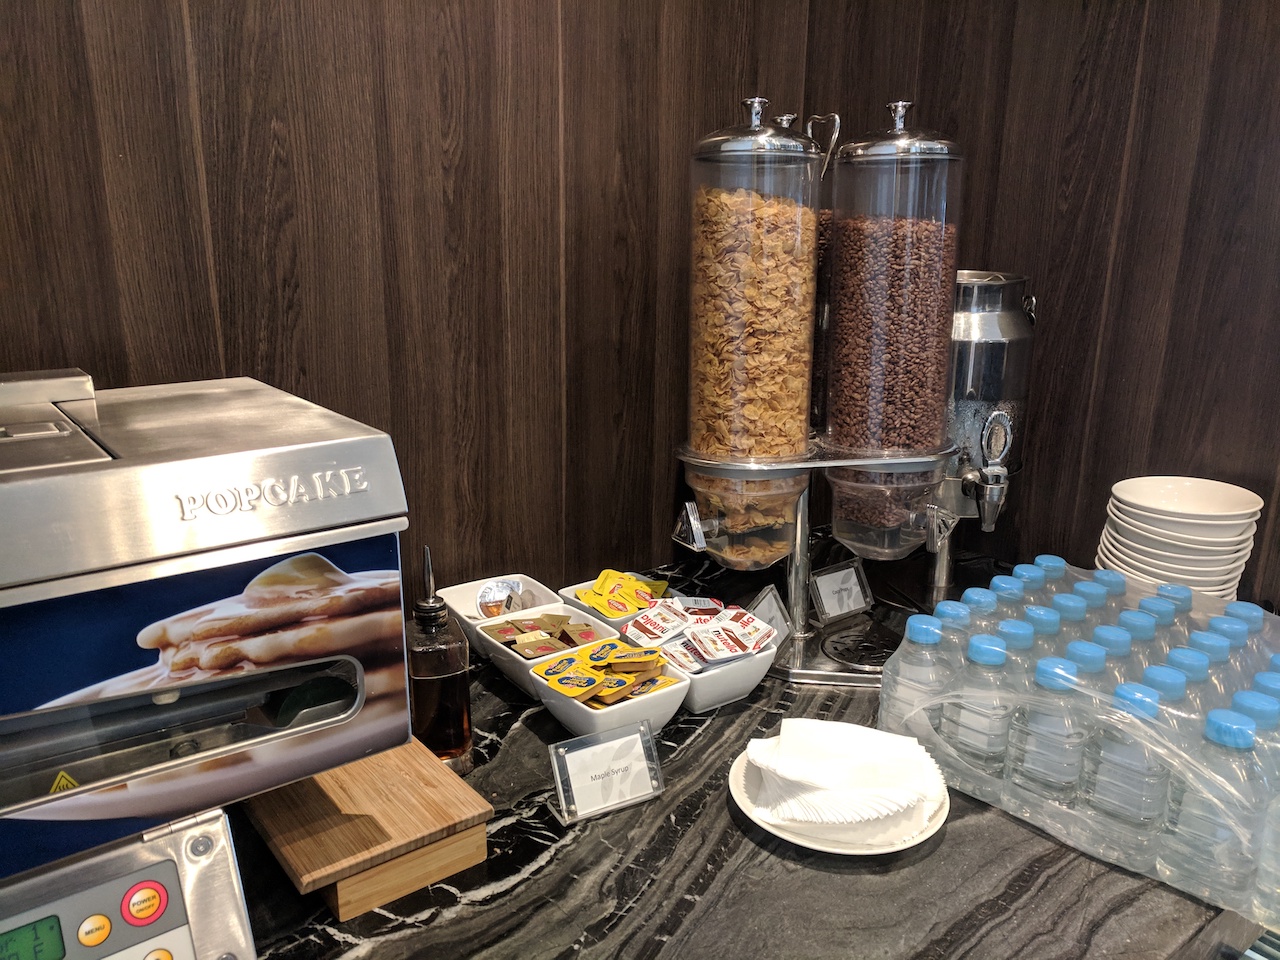 a breakfast buffet with cereals and other food items